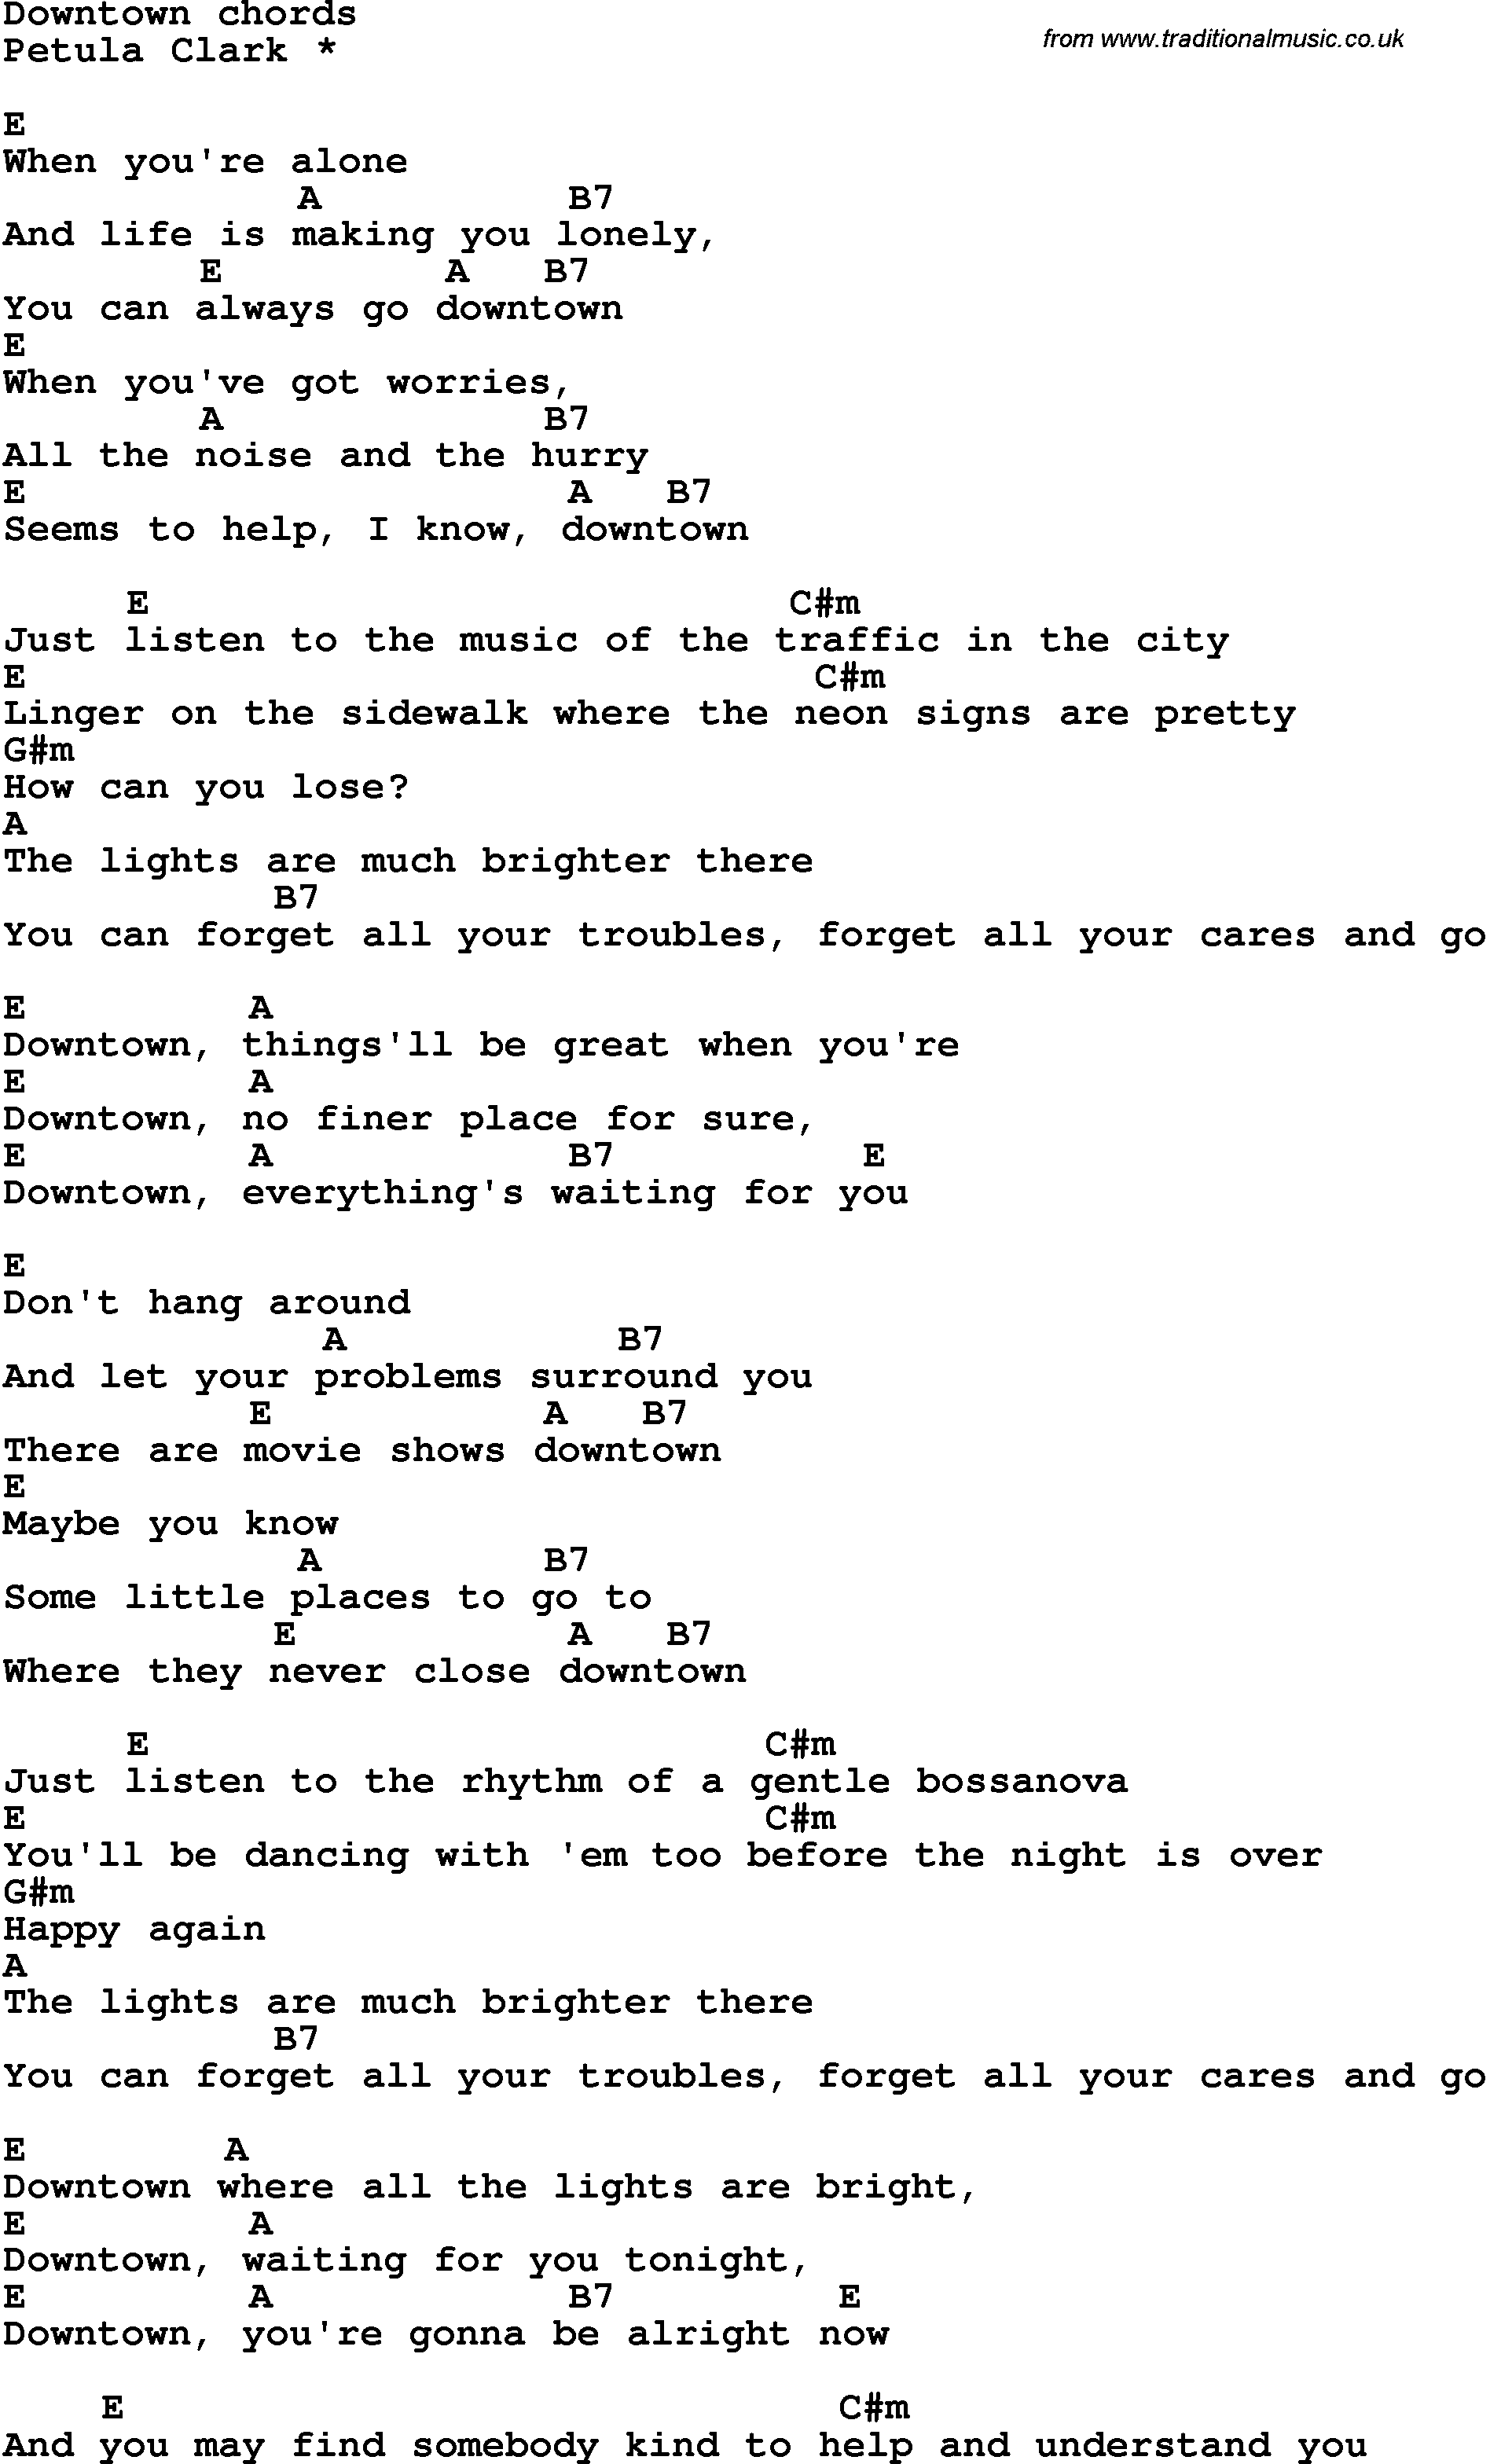 Song Lyrics with guitar chords for Downtown